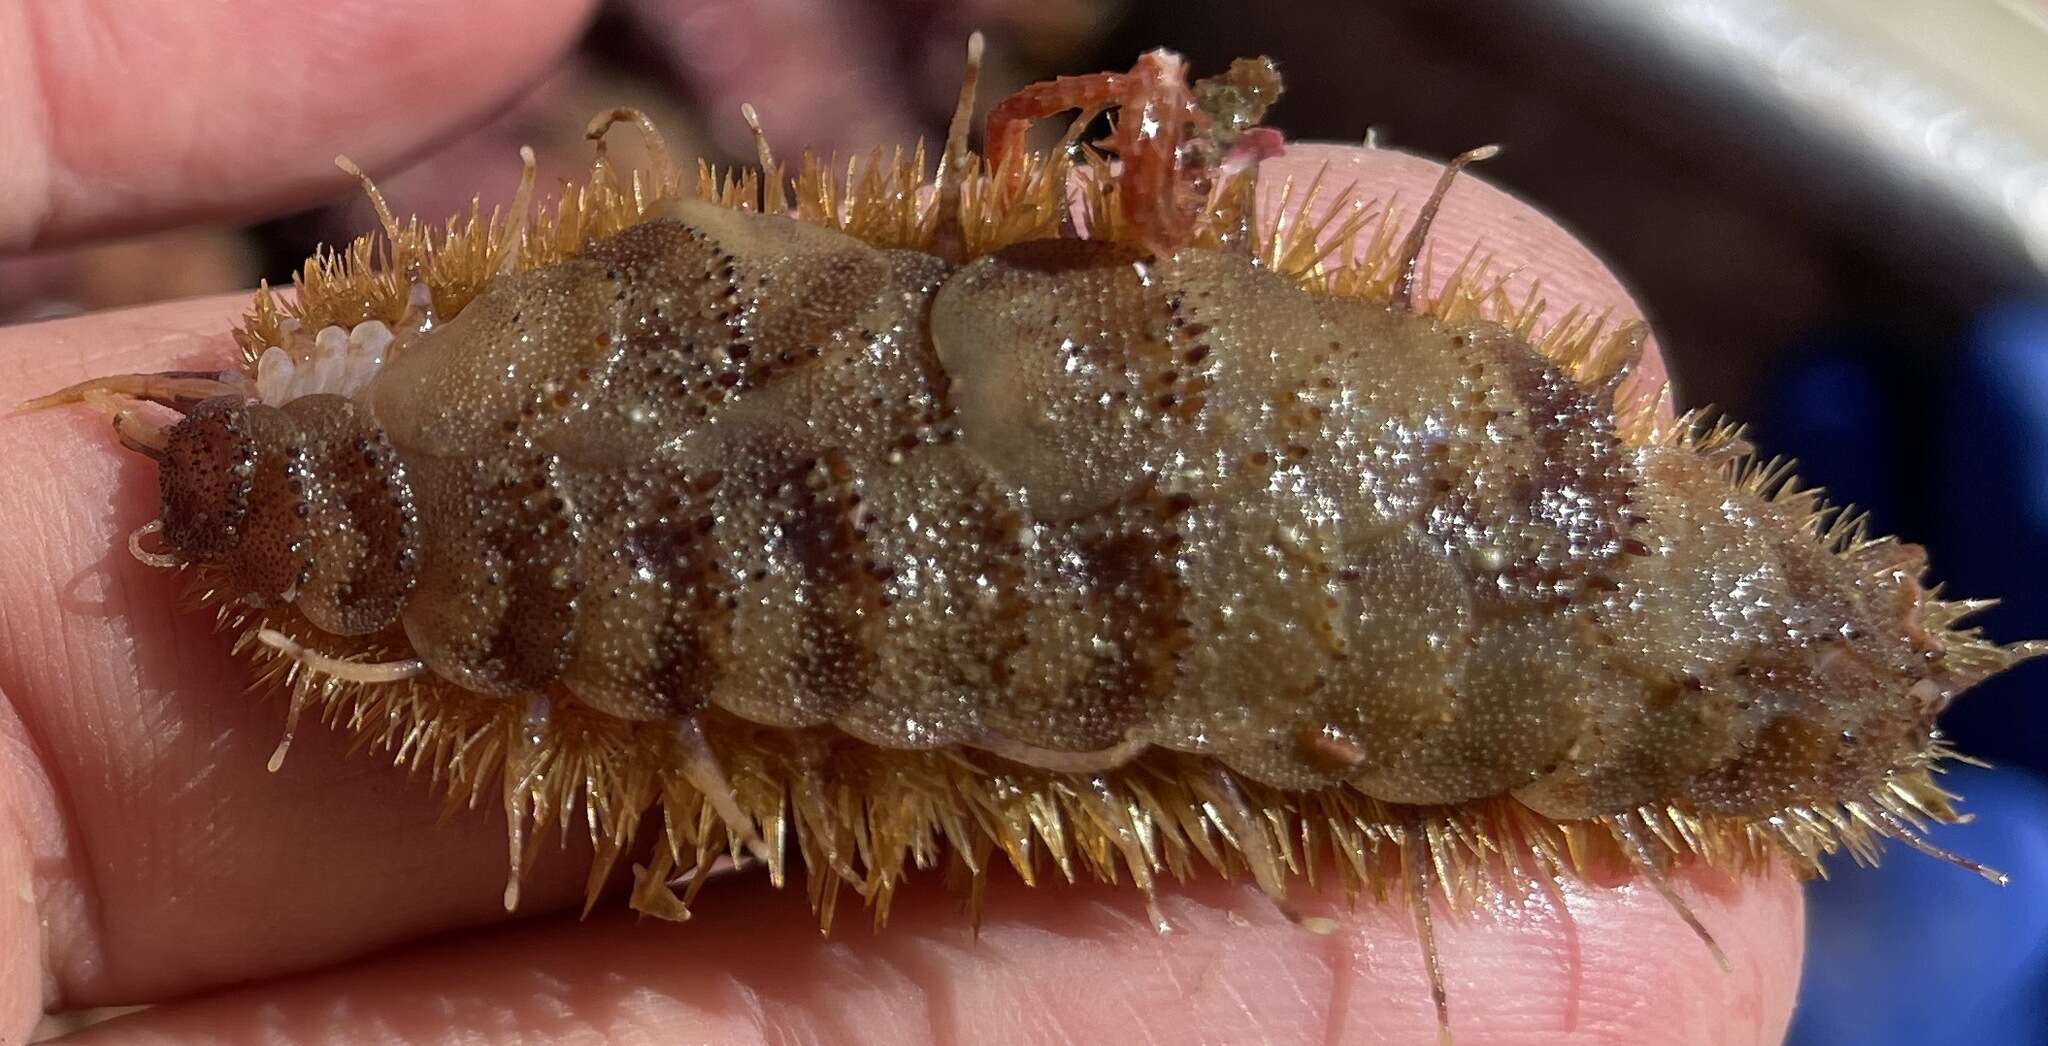 Image of Giant scale worm